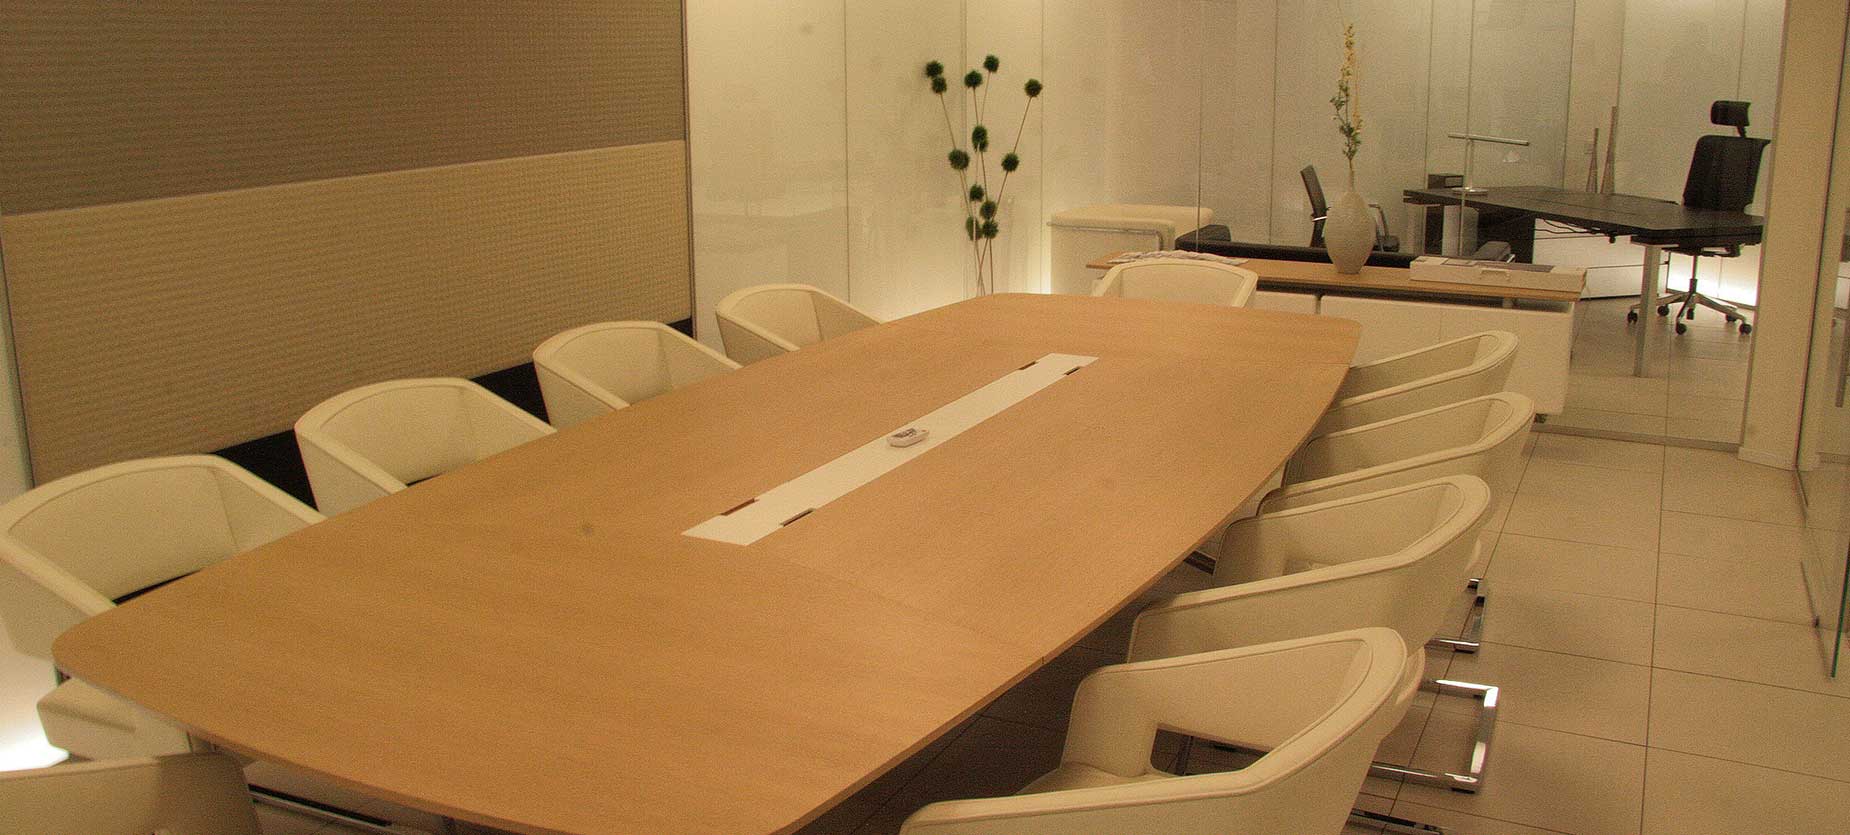 This conference room outfitted with the Audience table and b_sit seating create a high-end feel and still leave the space completely functional.